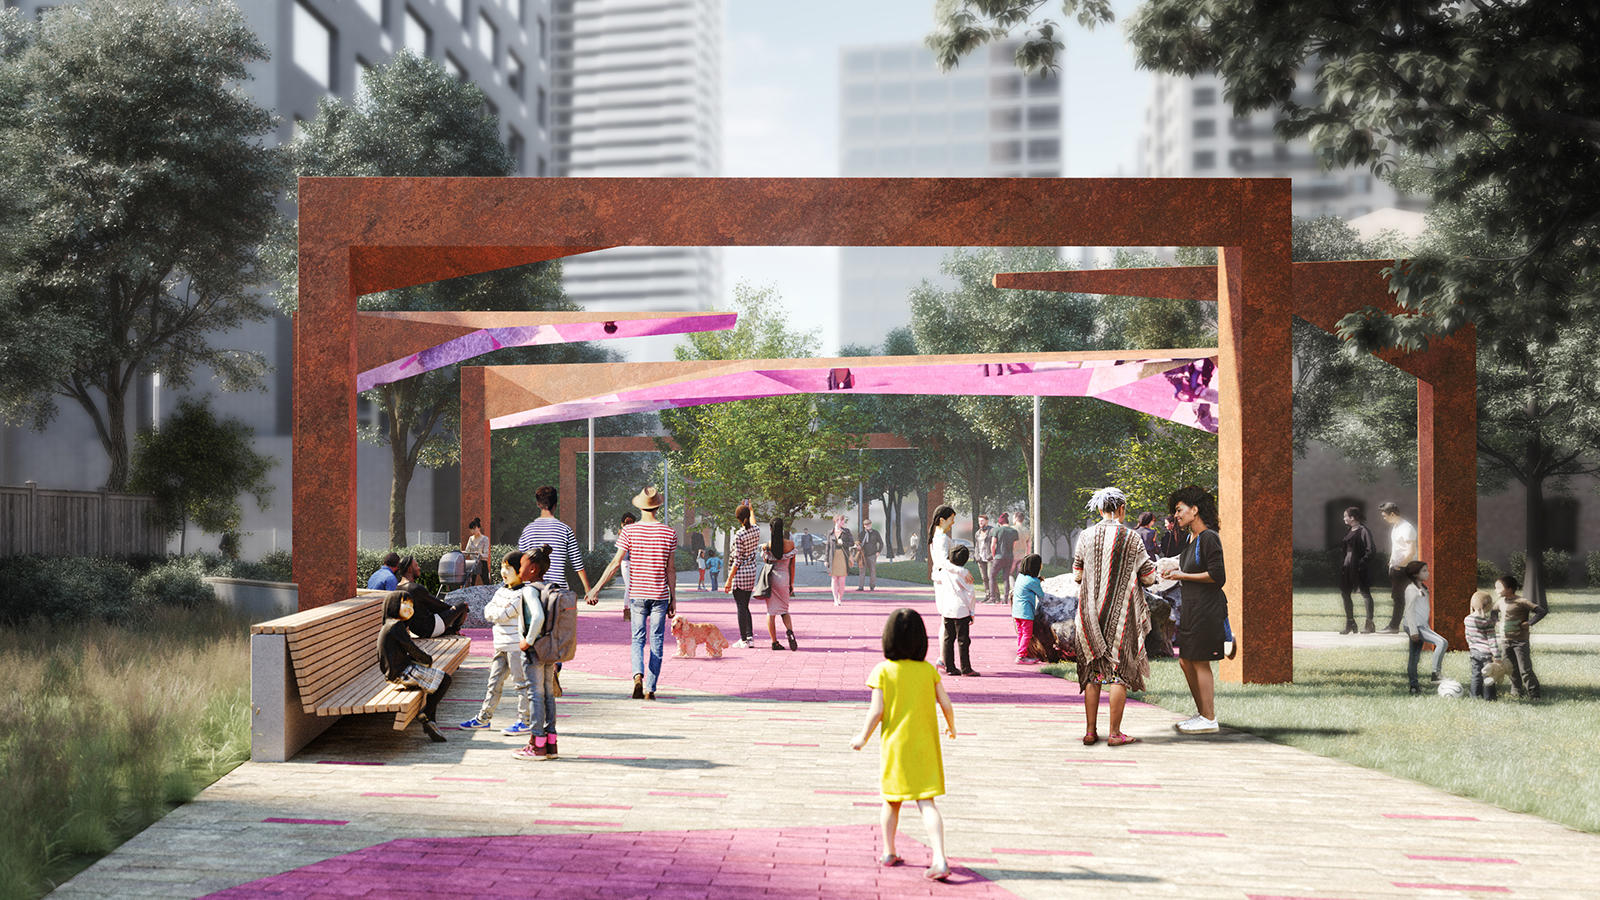 This rendering is a view created by the artist, of the integrated LGBTQ2S+ element in the park. It features manipulated archways with reflective surfaces as well as pink lighting and paving to create a "dance floor" within the park. This image shows a daytime view.